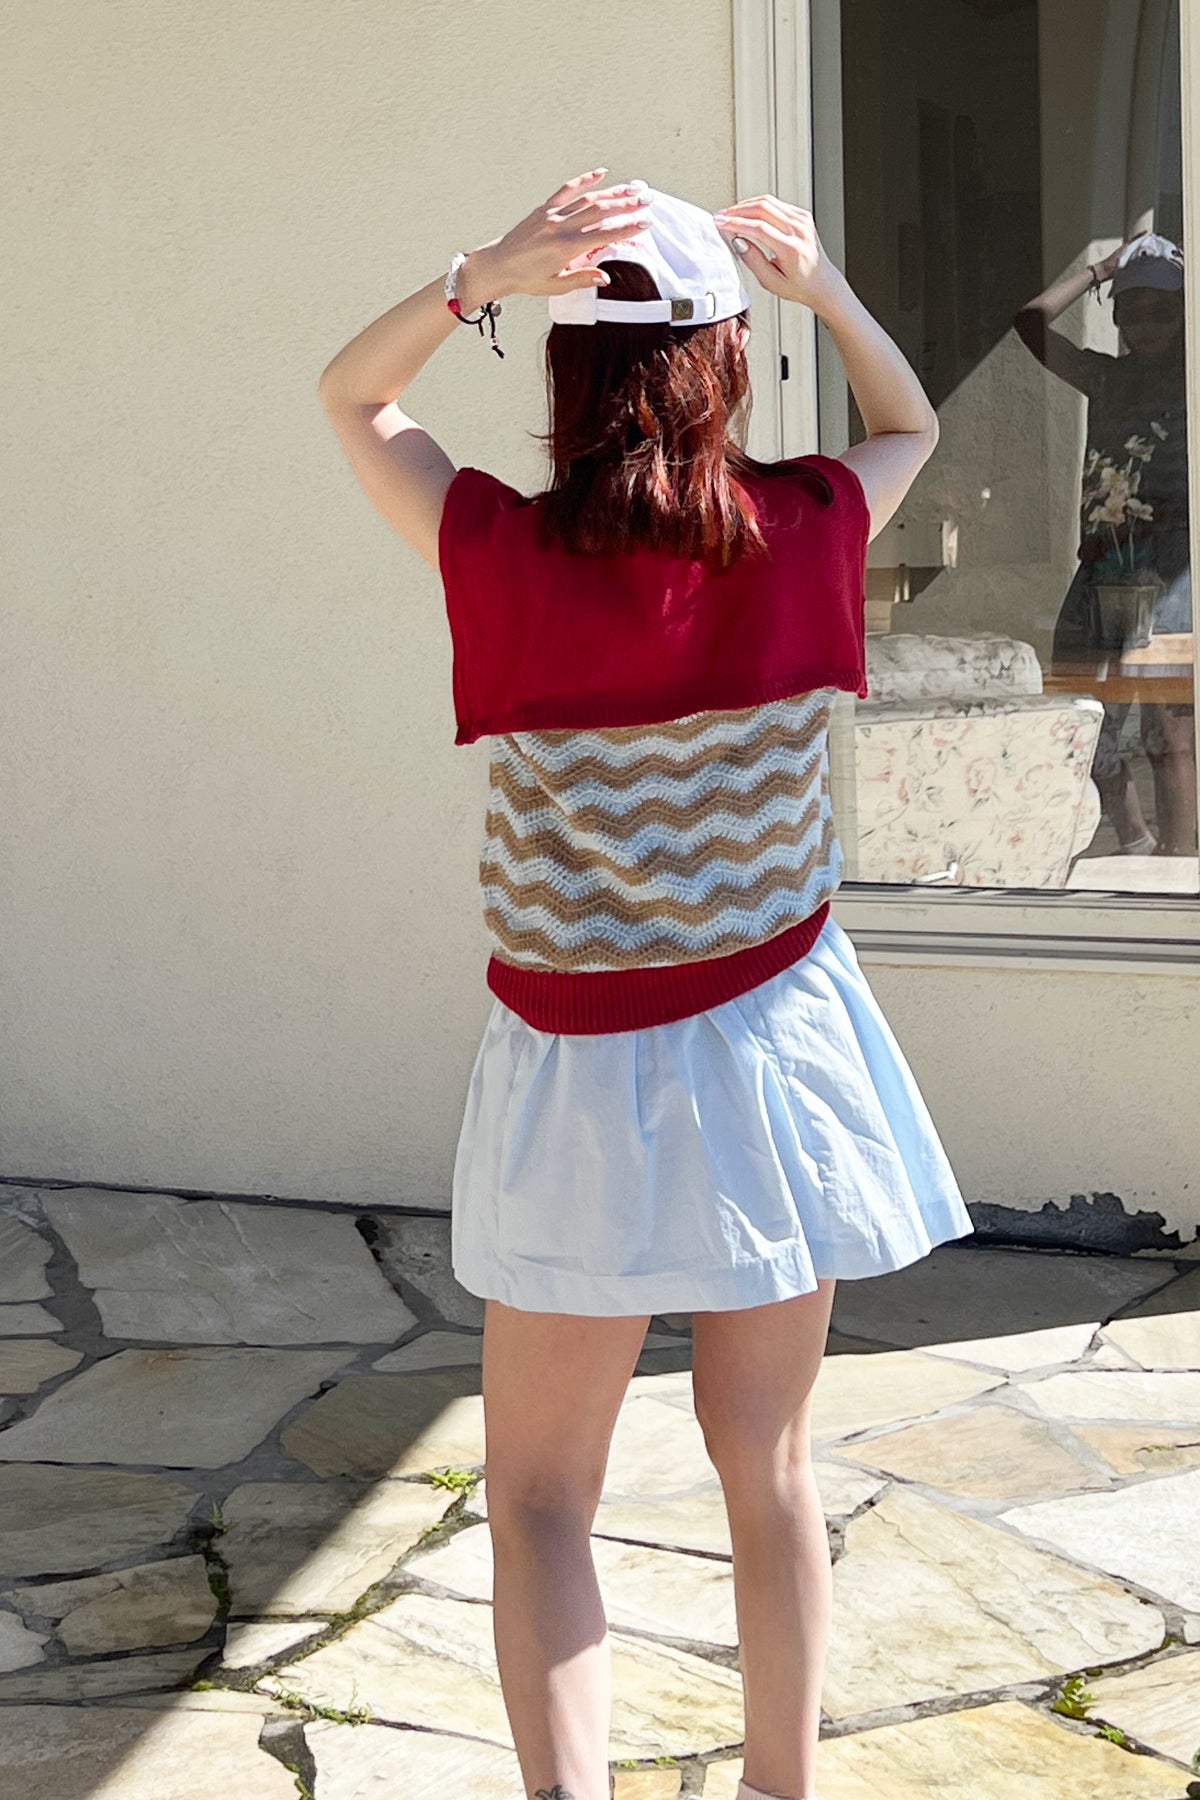 Wiggly Knit Sailor Top / Red